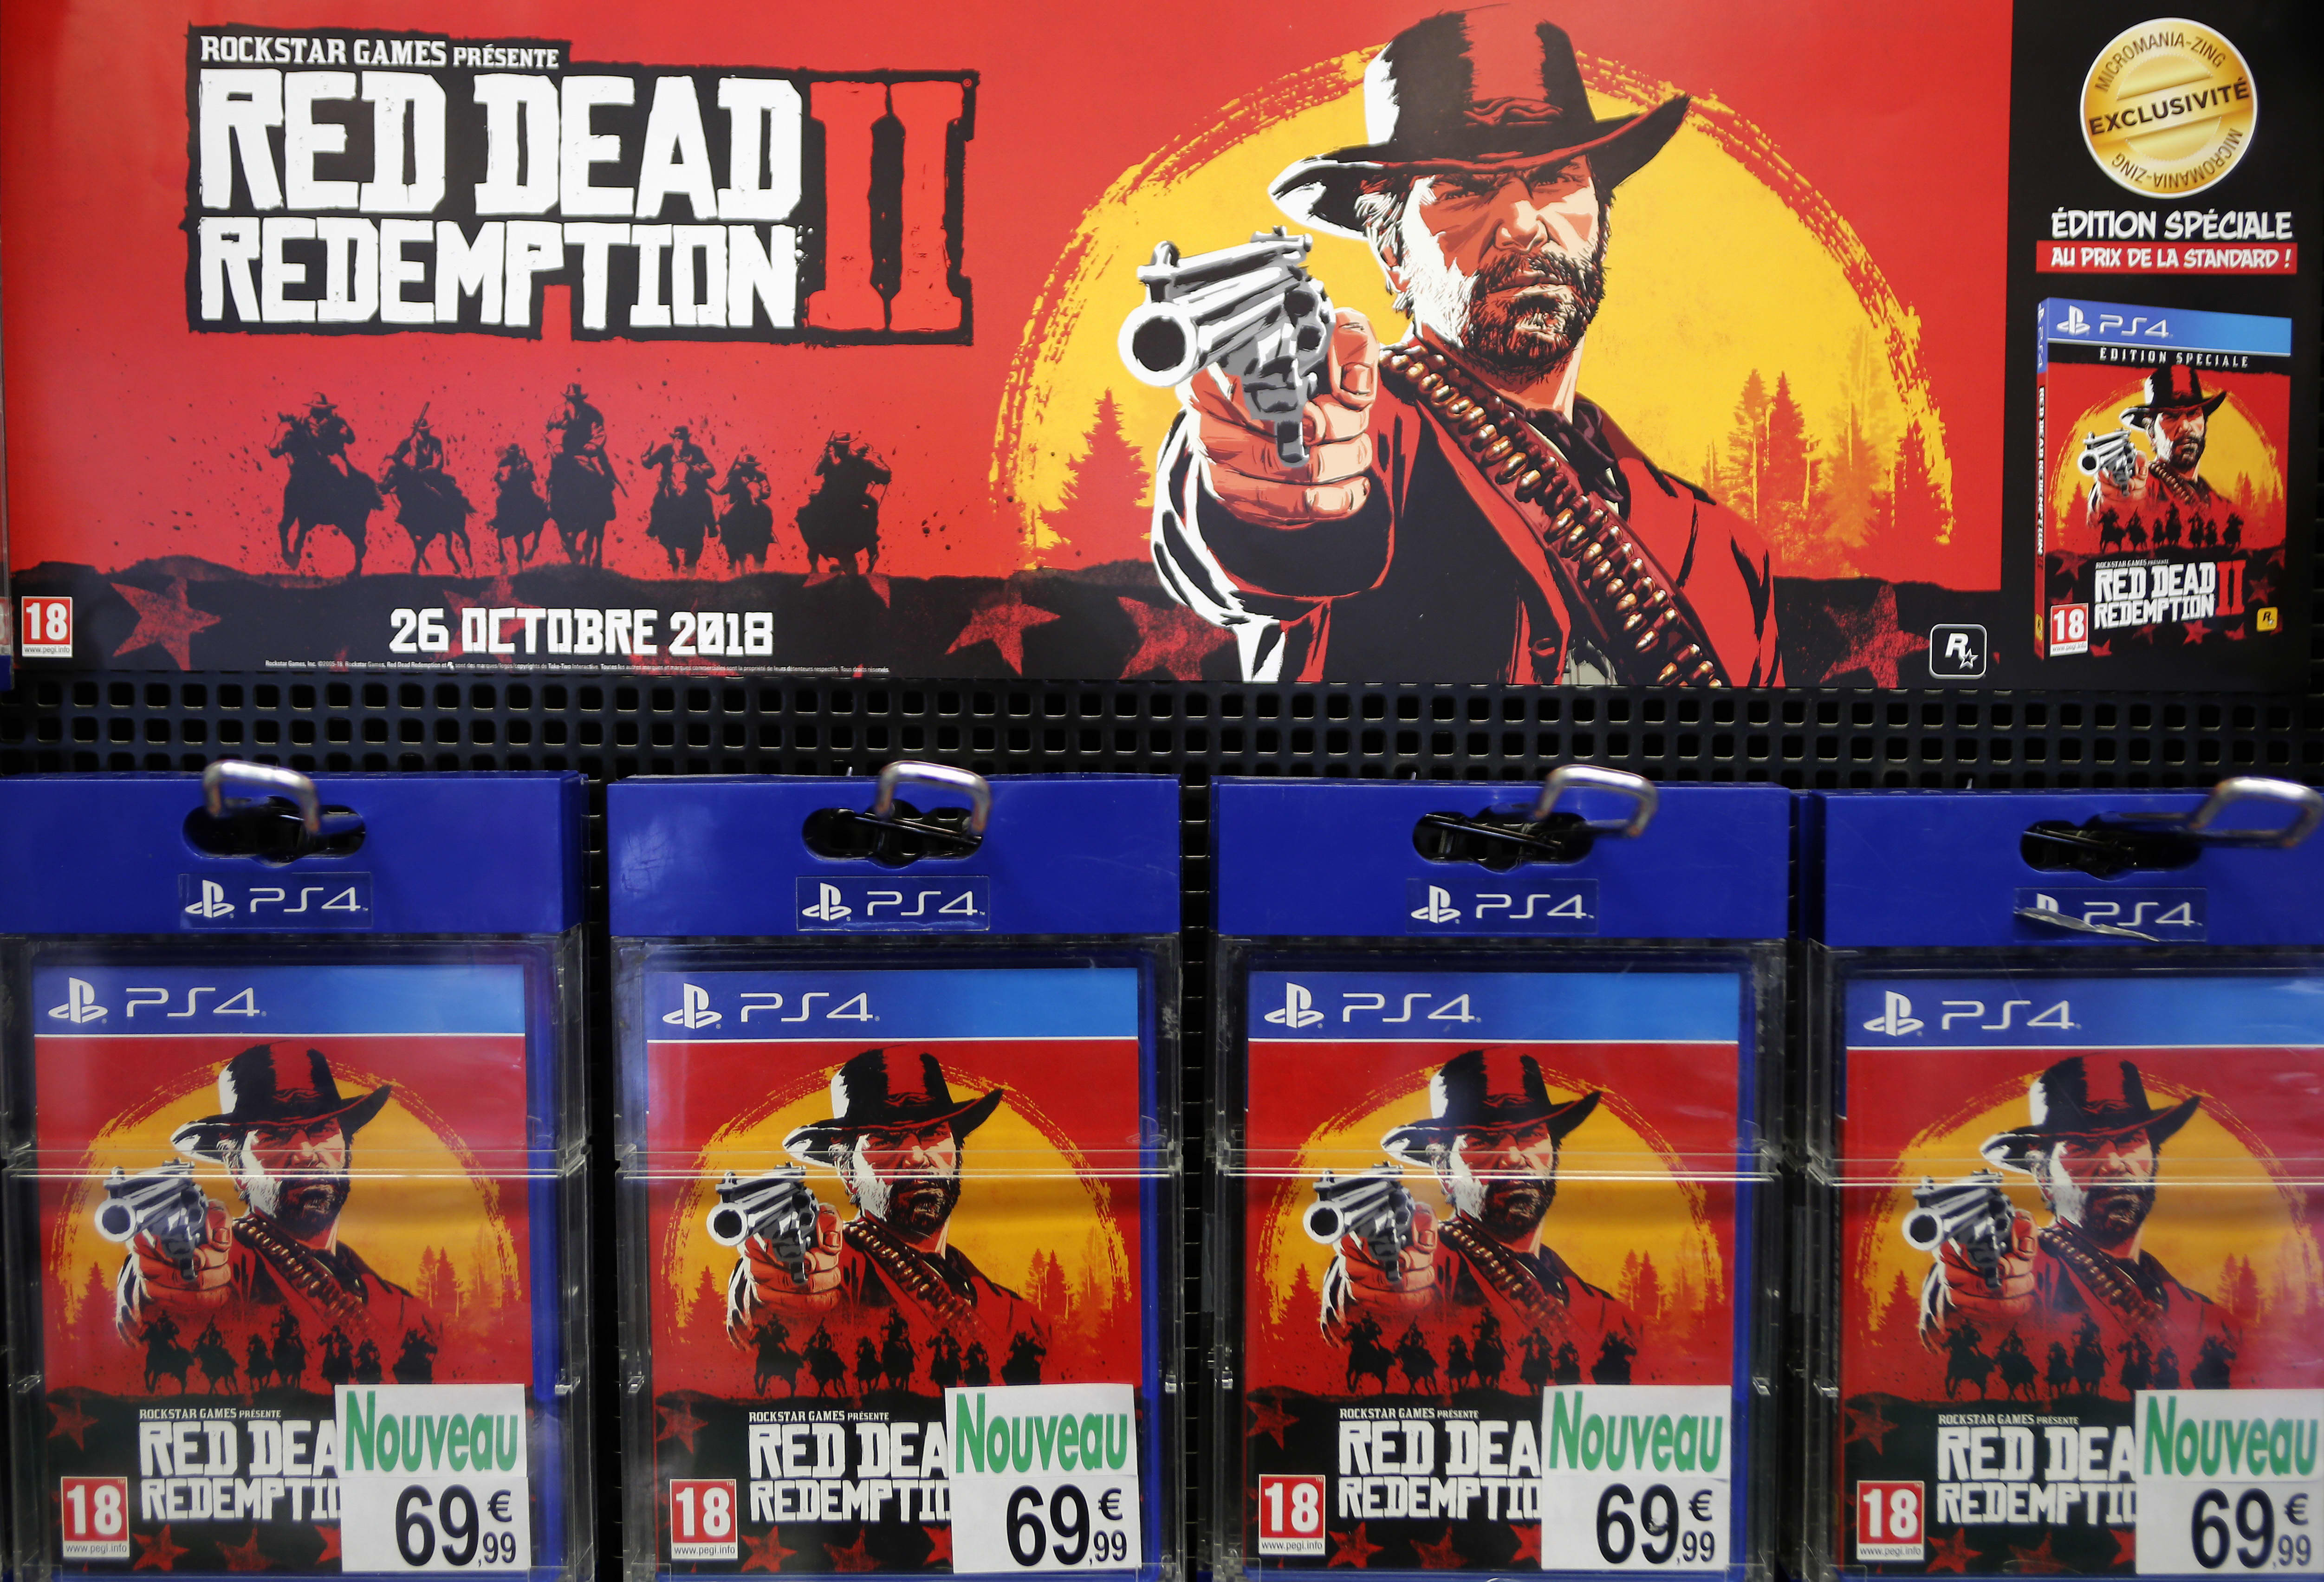 Rdr2 Xbox Series. Rdr 2 ps5. Рокстар геймс РДР. Red Dead Redemption 2 ps4. Игры rockstar games red